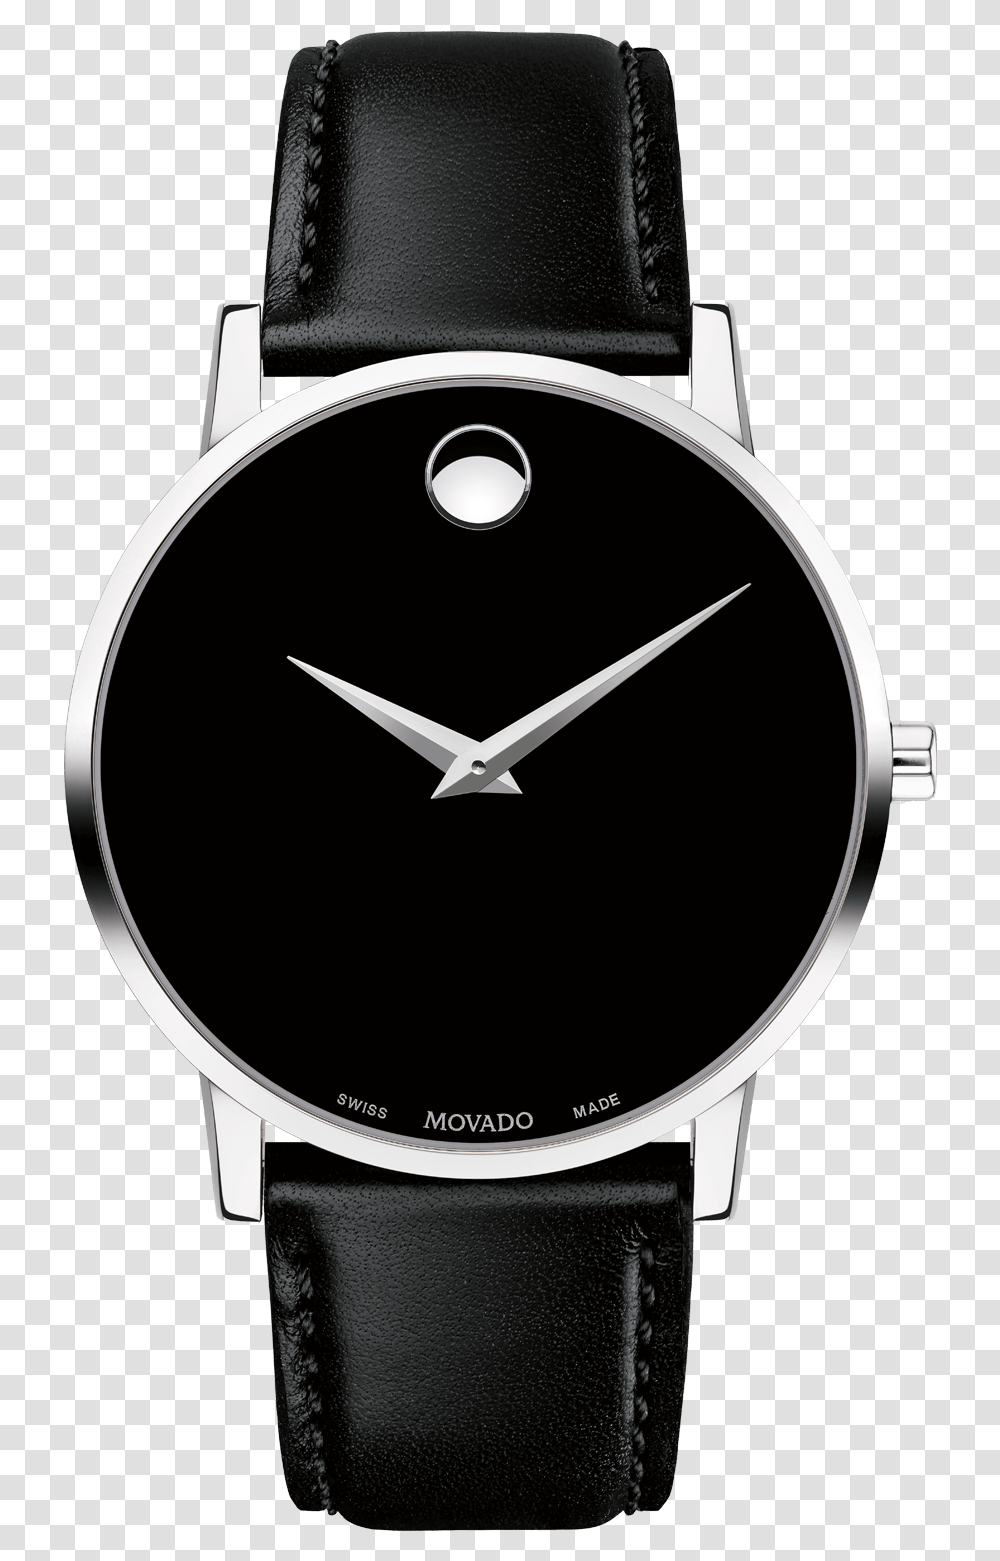 Movado Watches Movado Black Watches Women, Wristwatch, Analog Clock Transparent Png